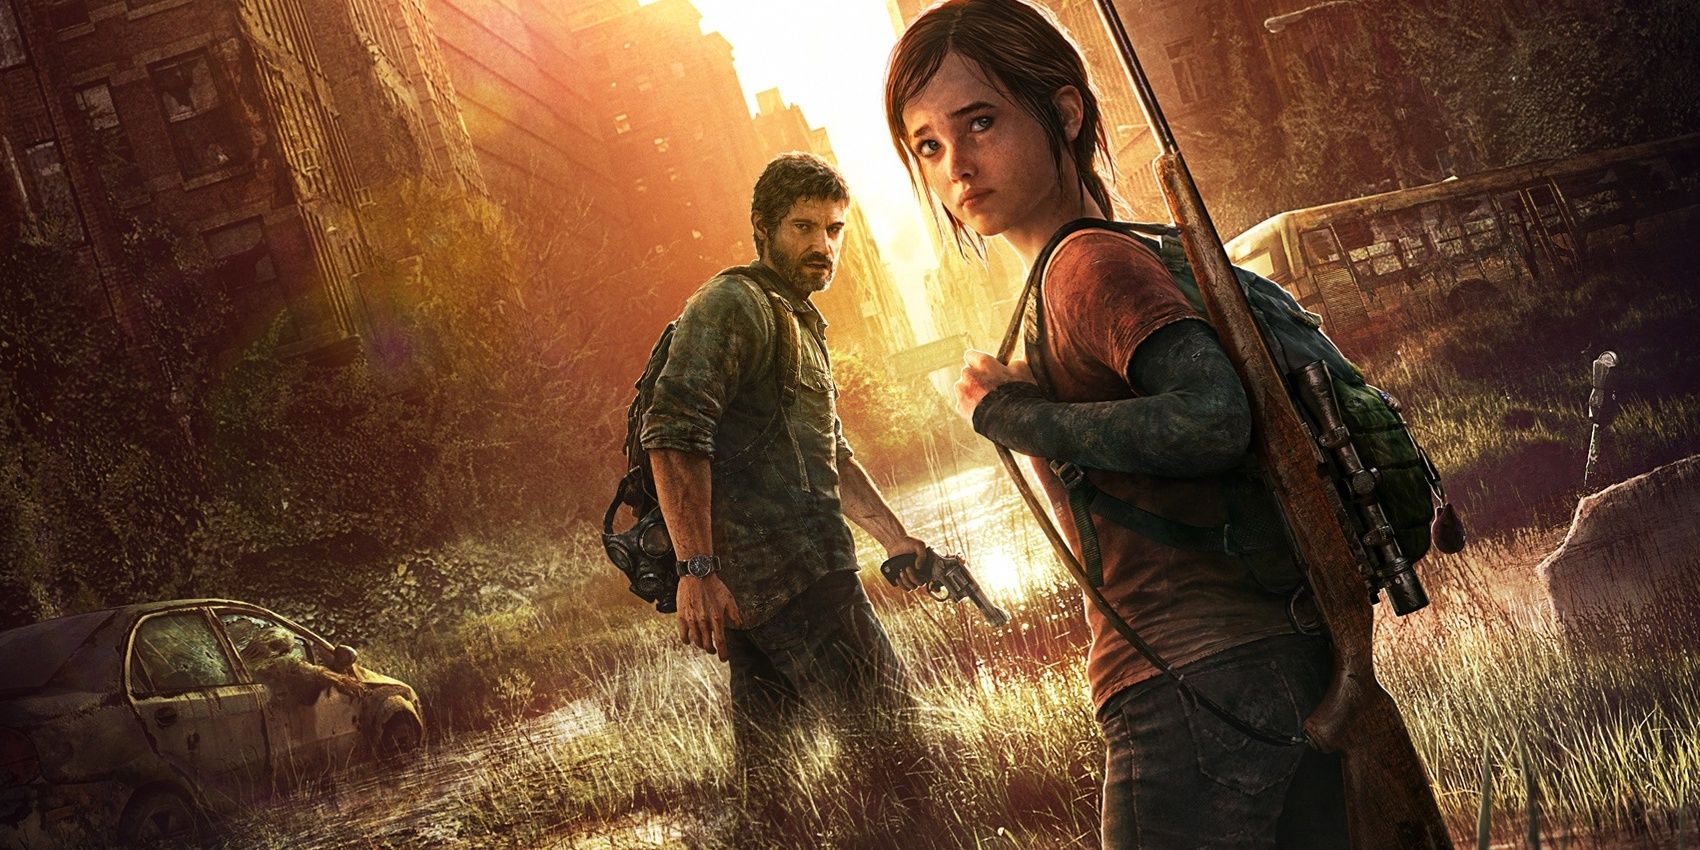 The Last of Us poster featuring Ellie and Joel walking through a ruined city street.